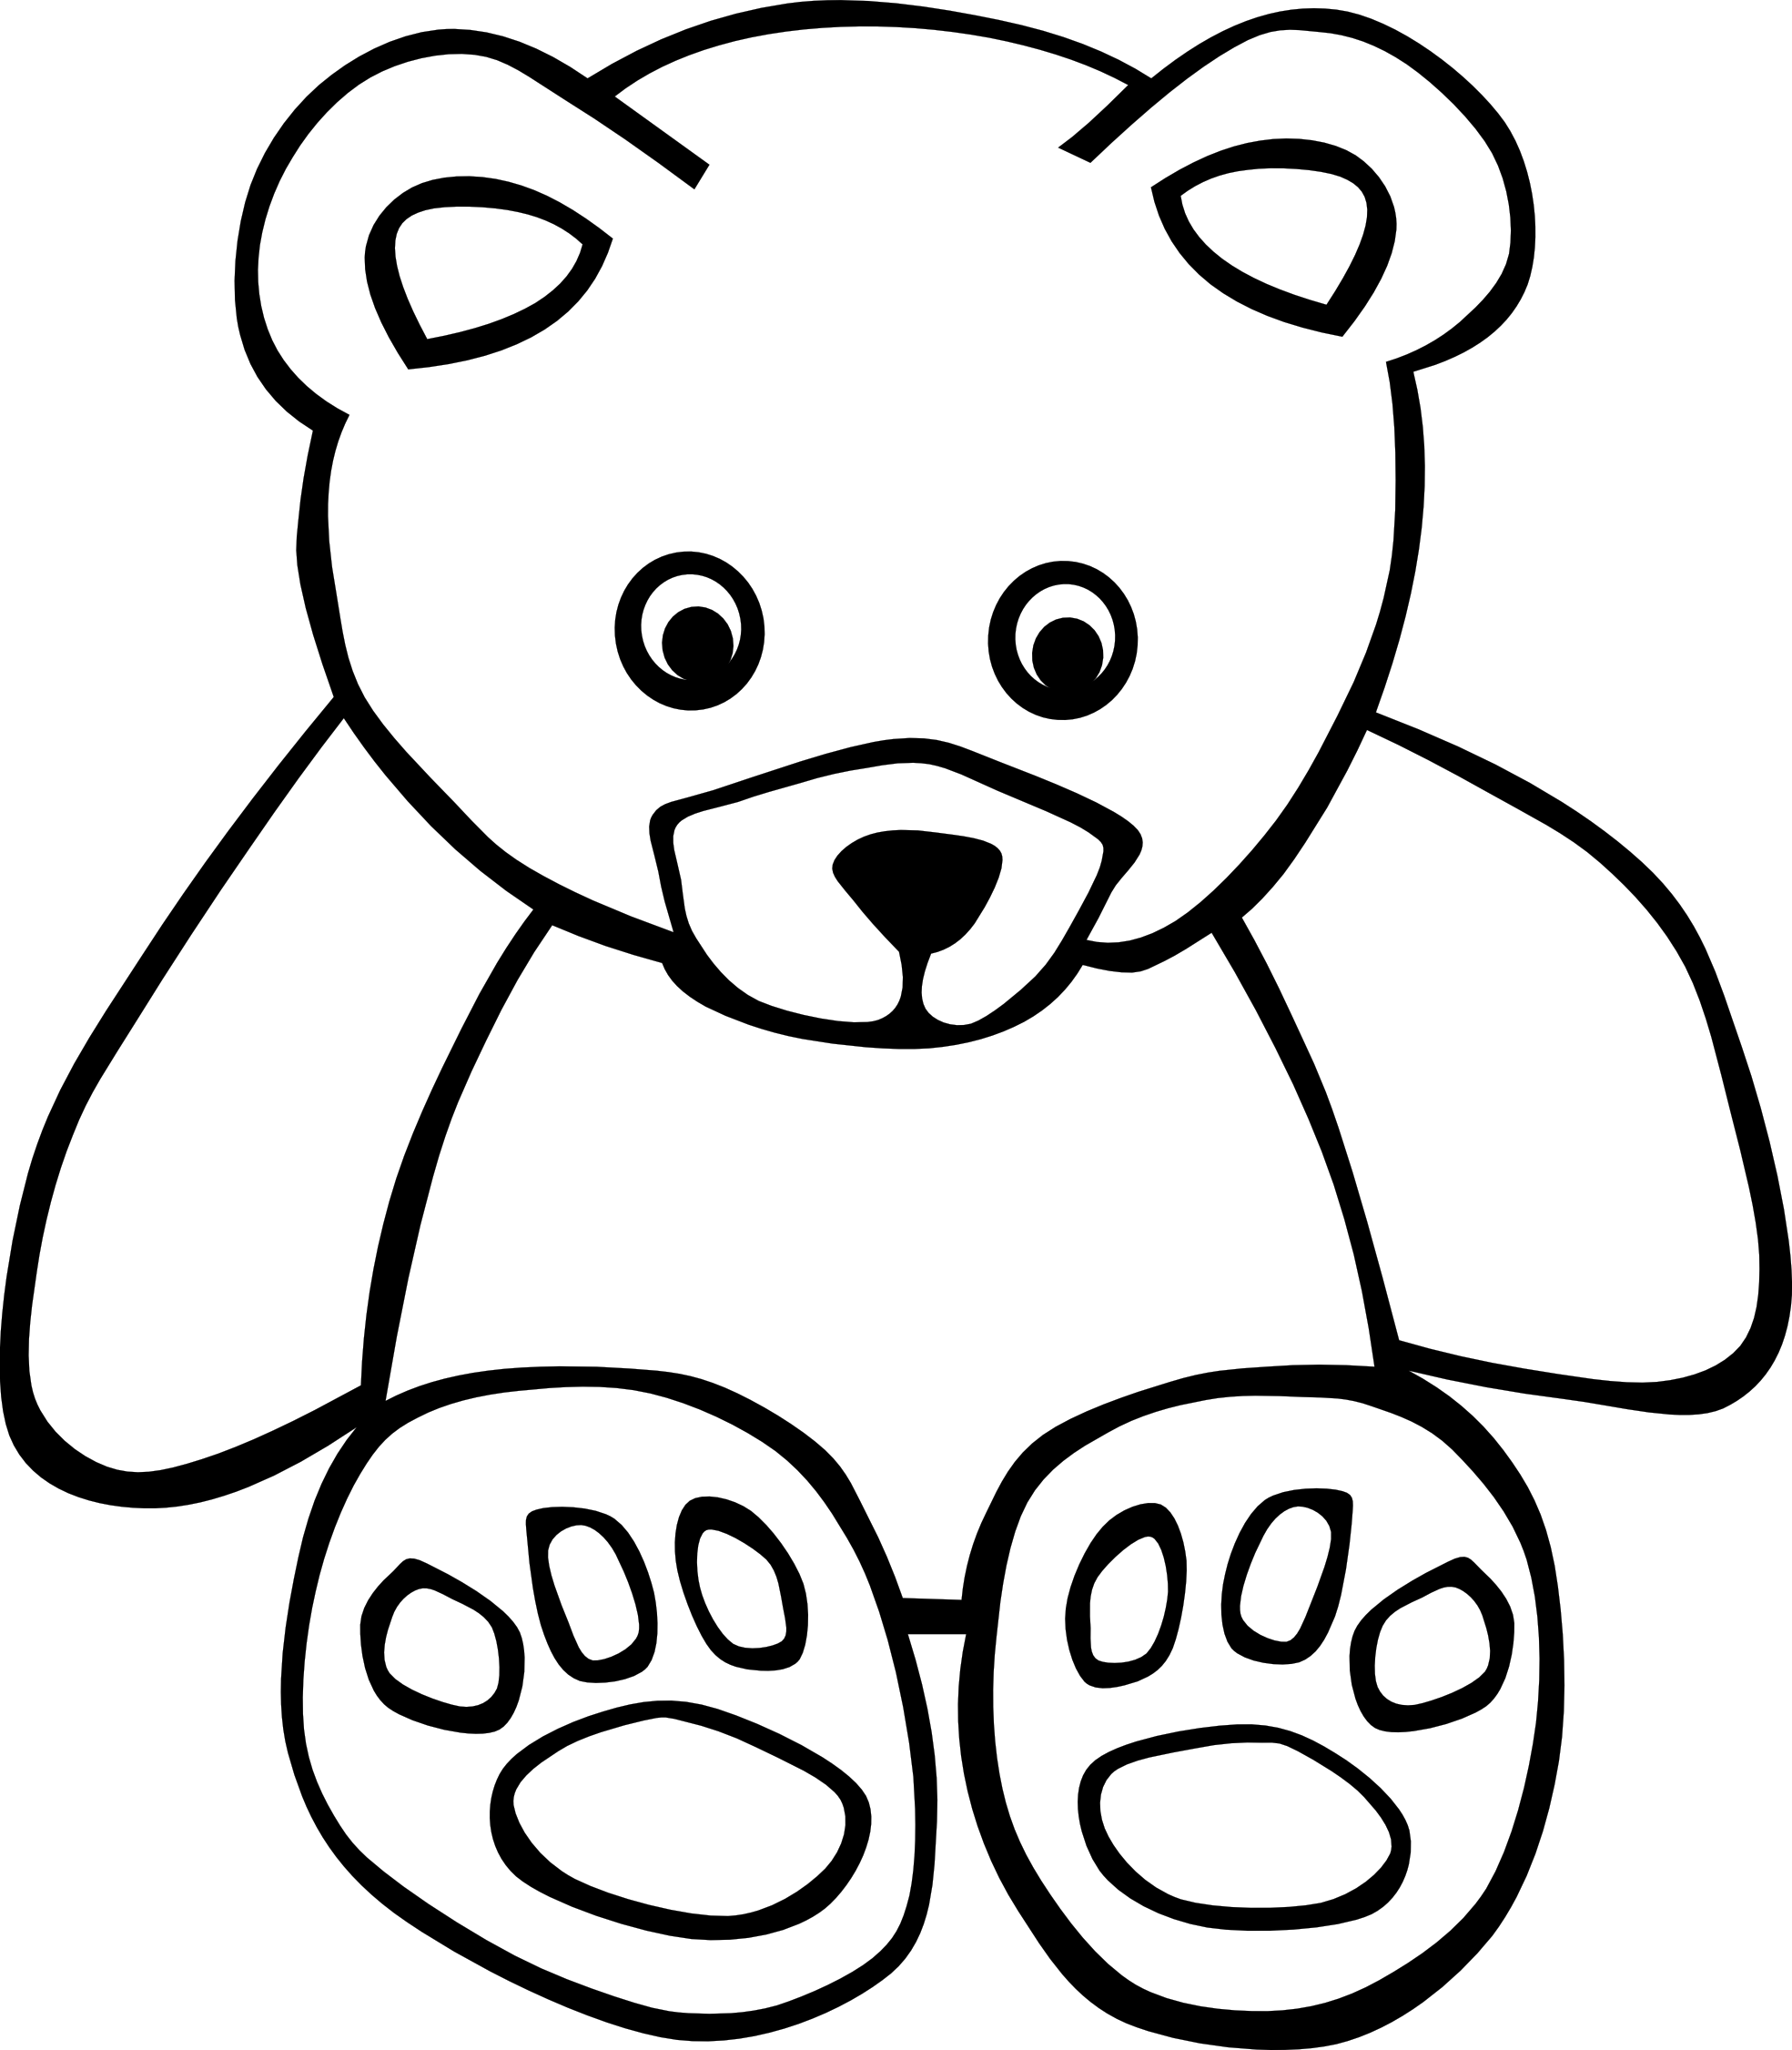 Free Teddy Bear Draw Download Free Clip Art Free Clip Art On Clipart Library